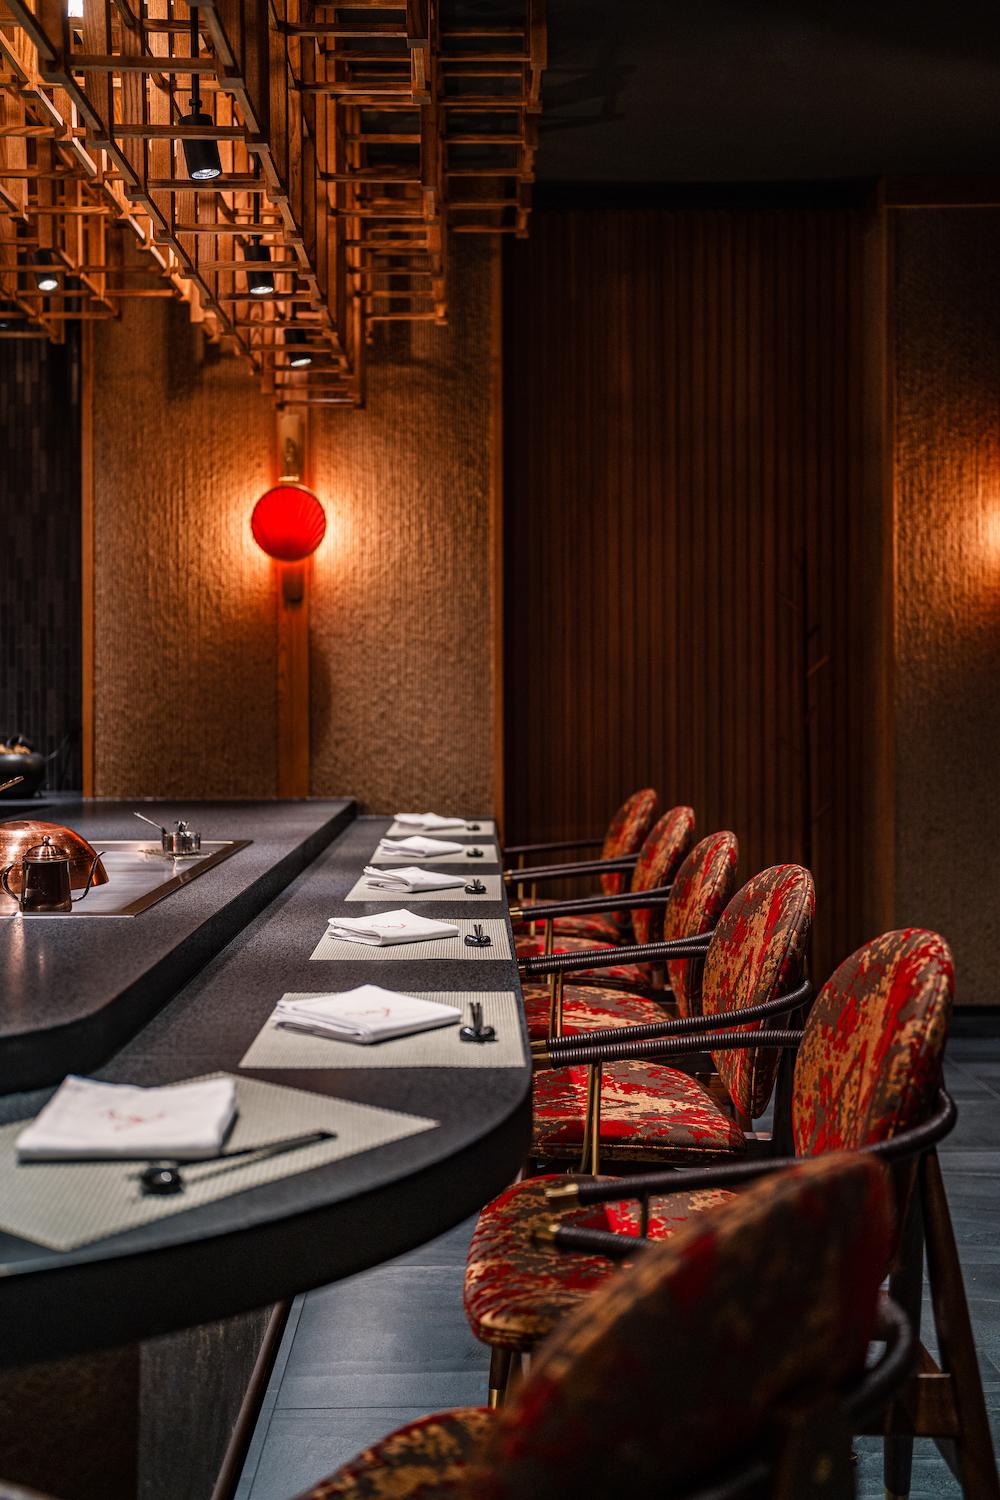 This Teppanyaki Restaurant Offers Diners a Japanese Theatre-inspired Dining Experience in Hong Kong